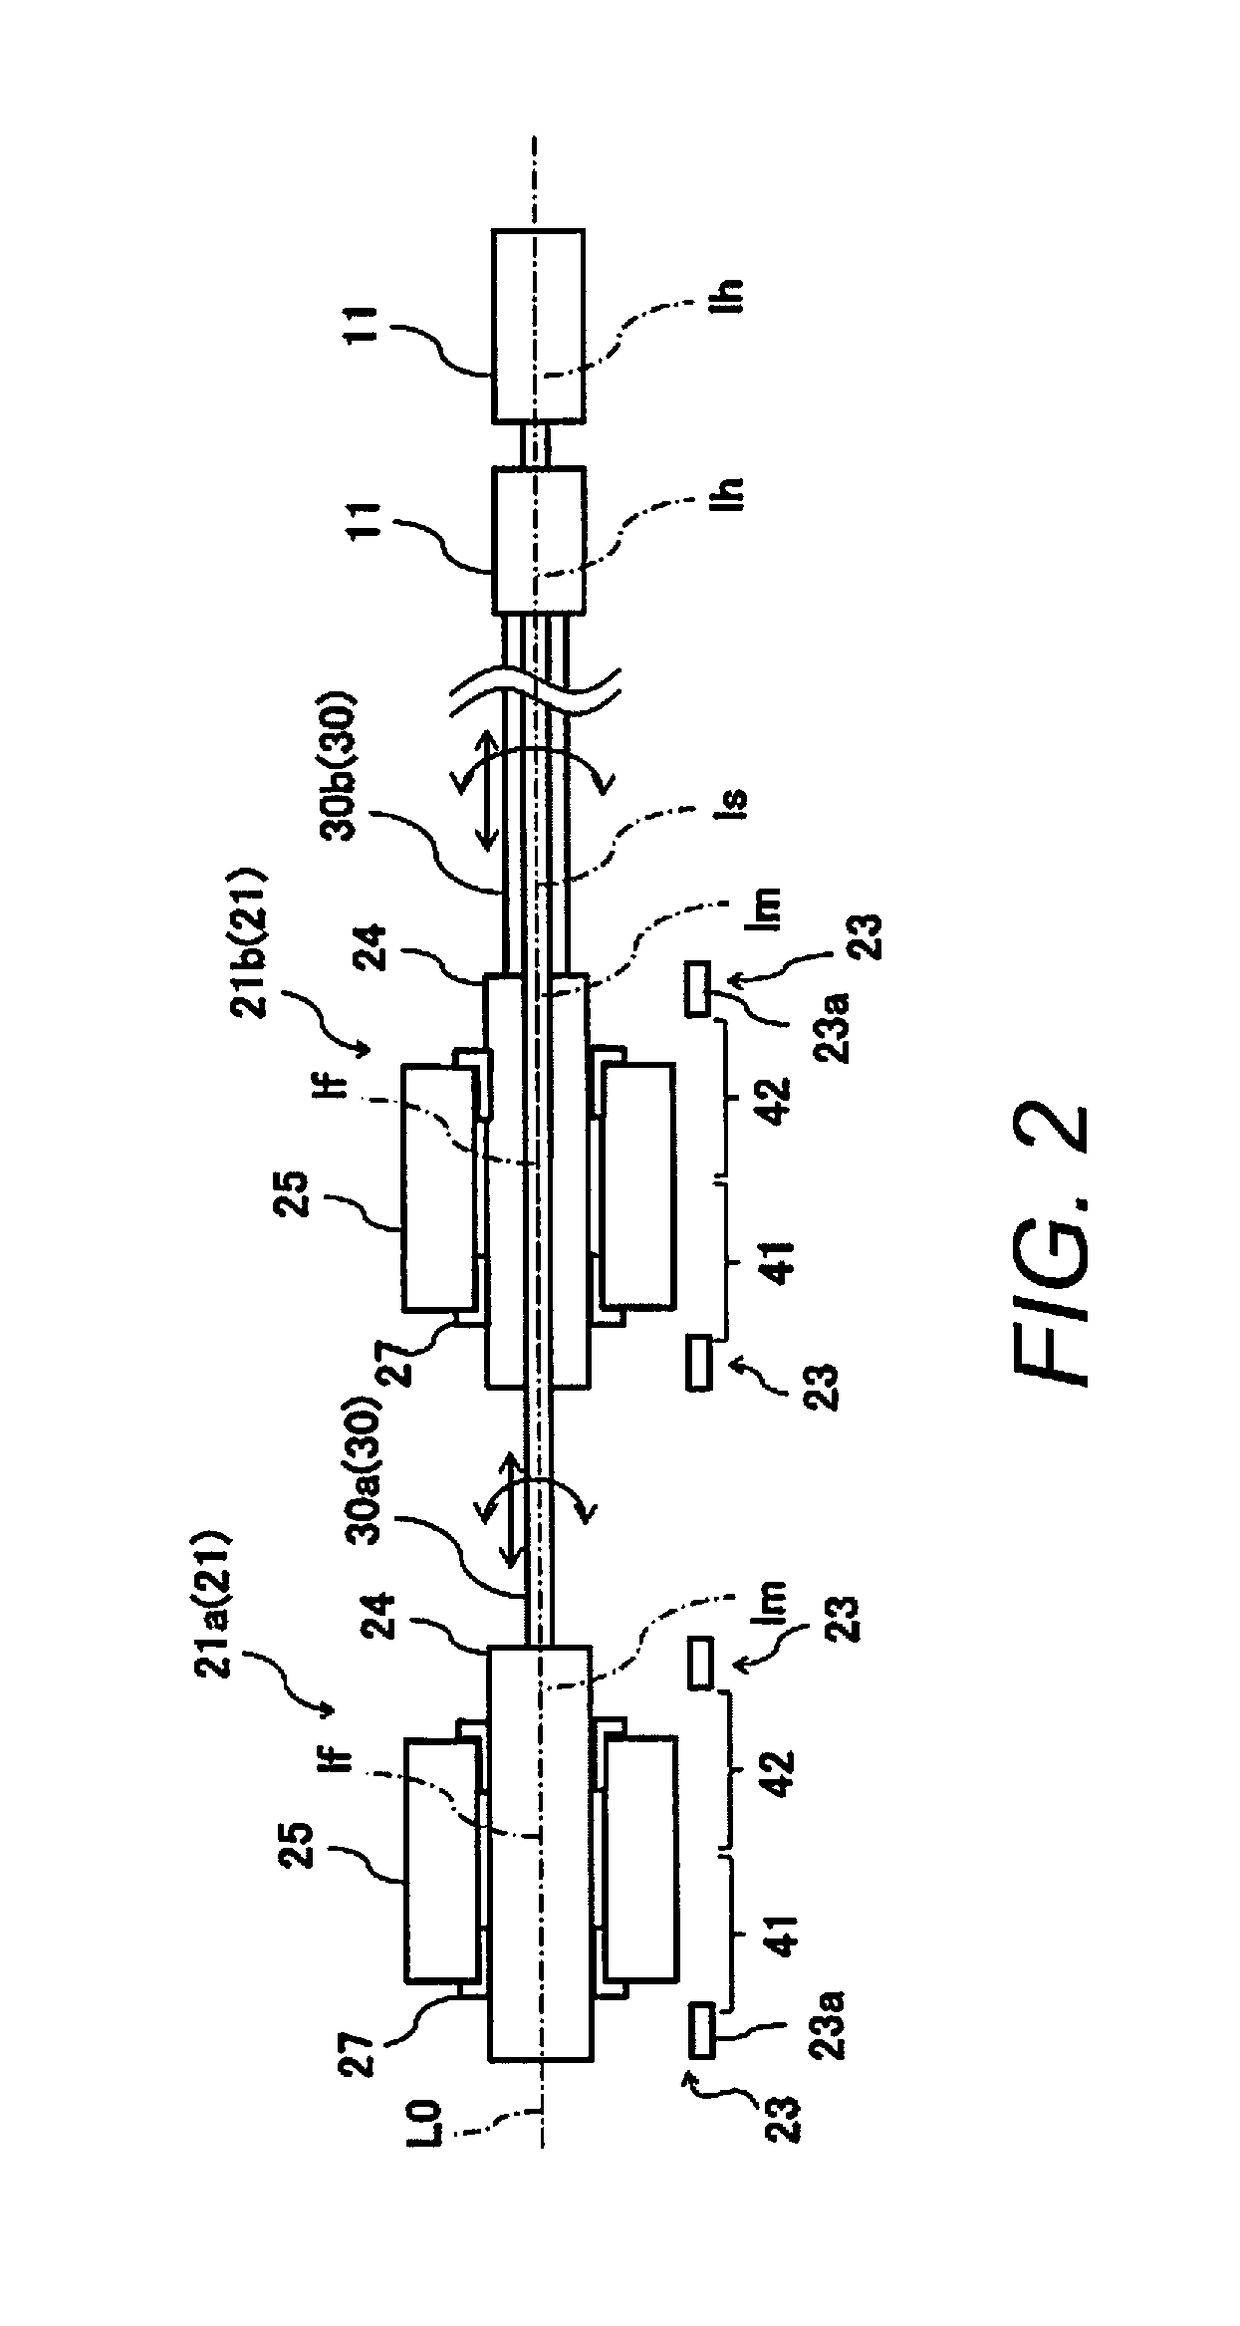 Operational feeling reproduction device